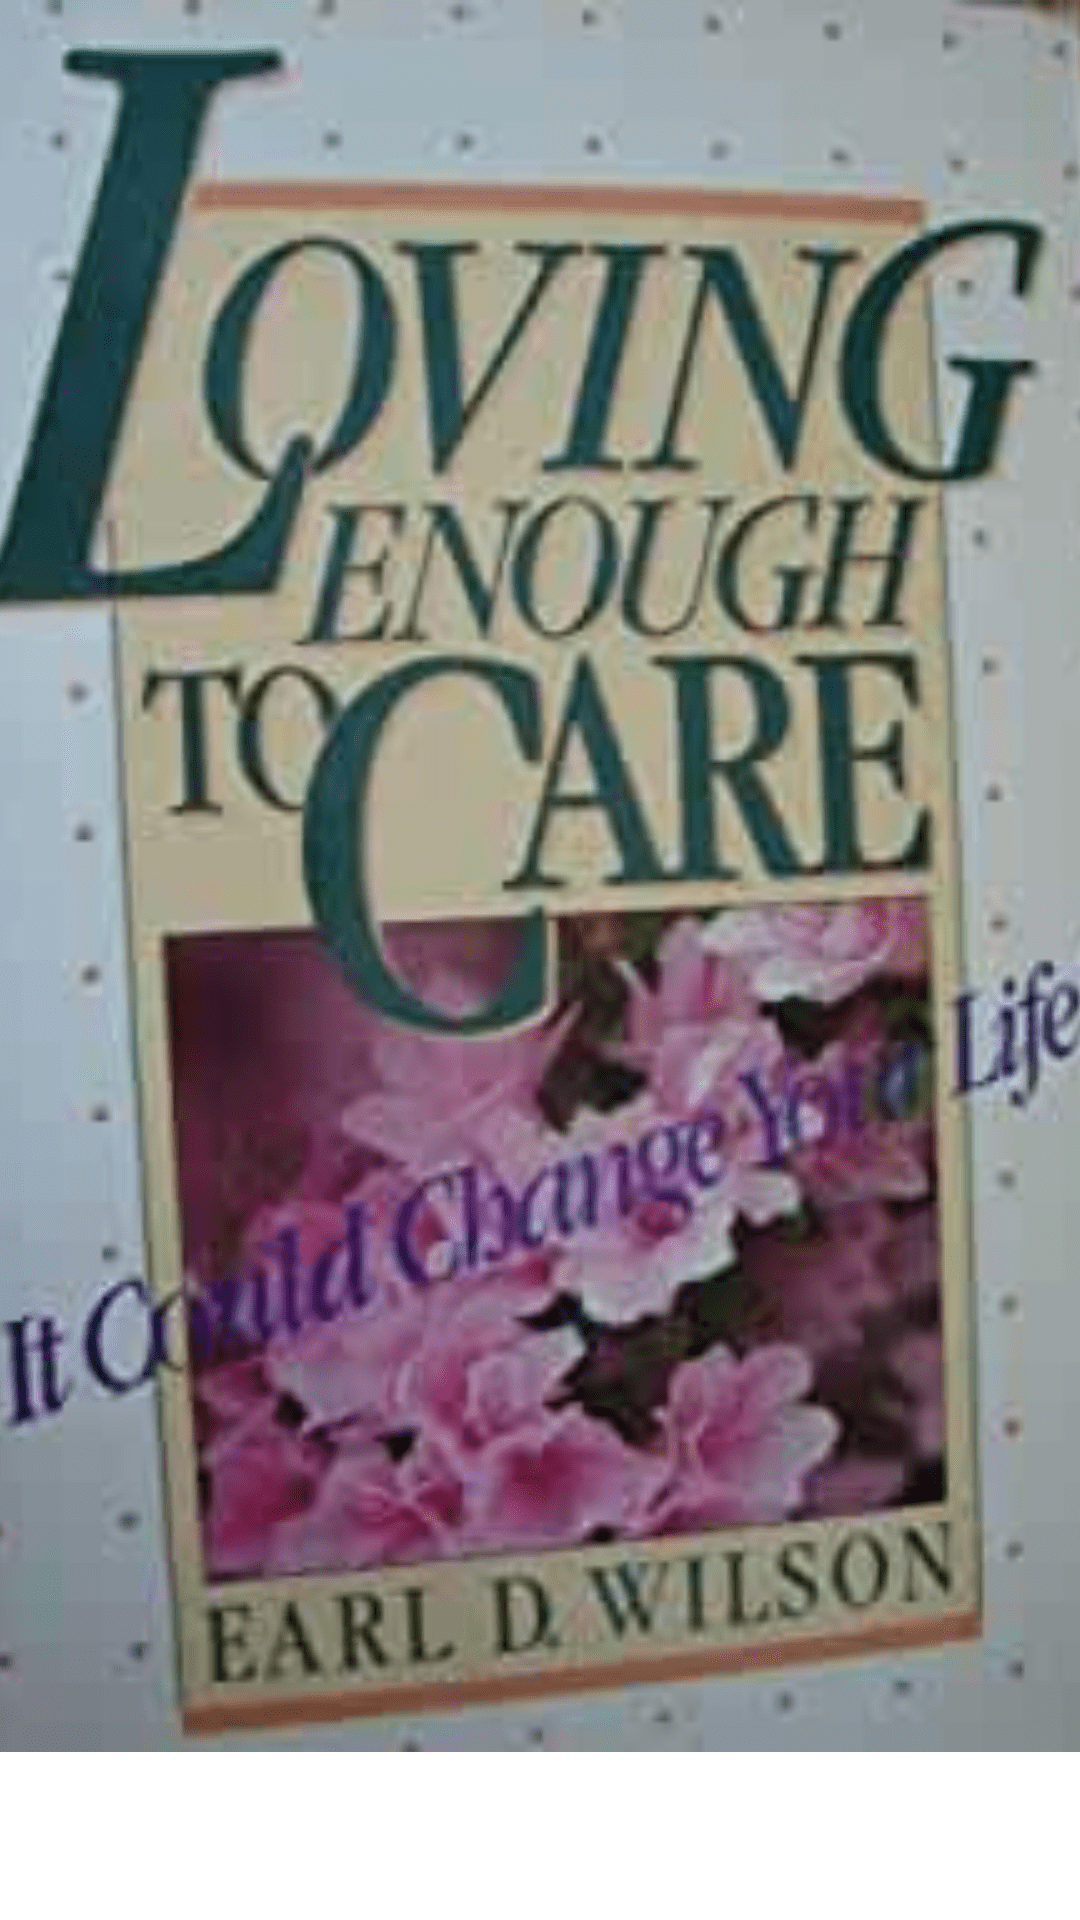 Loving enough to care by Earl D. Wilson